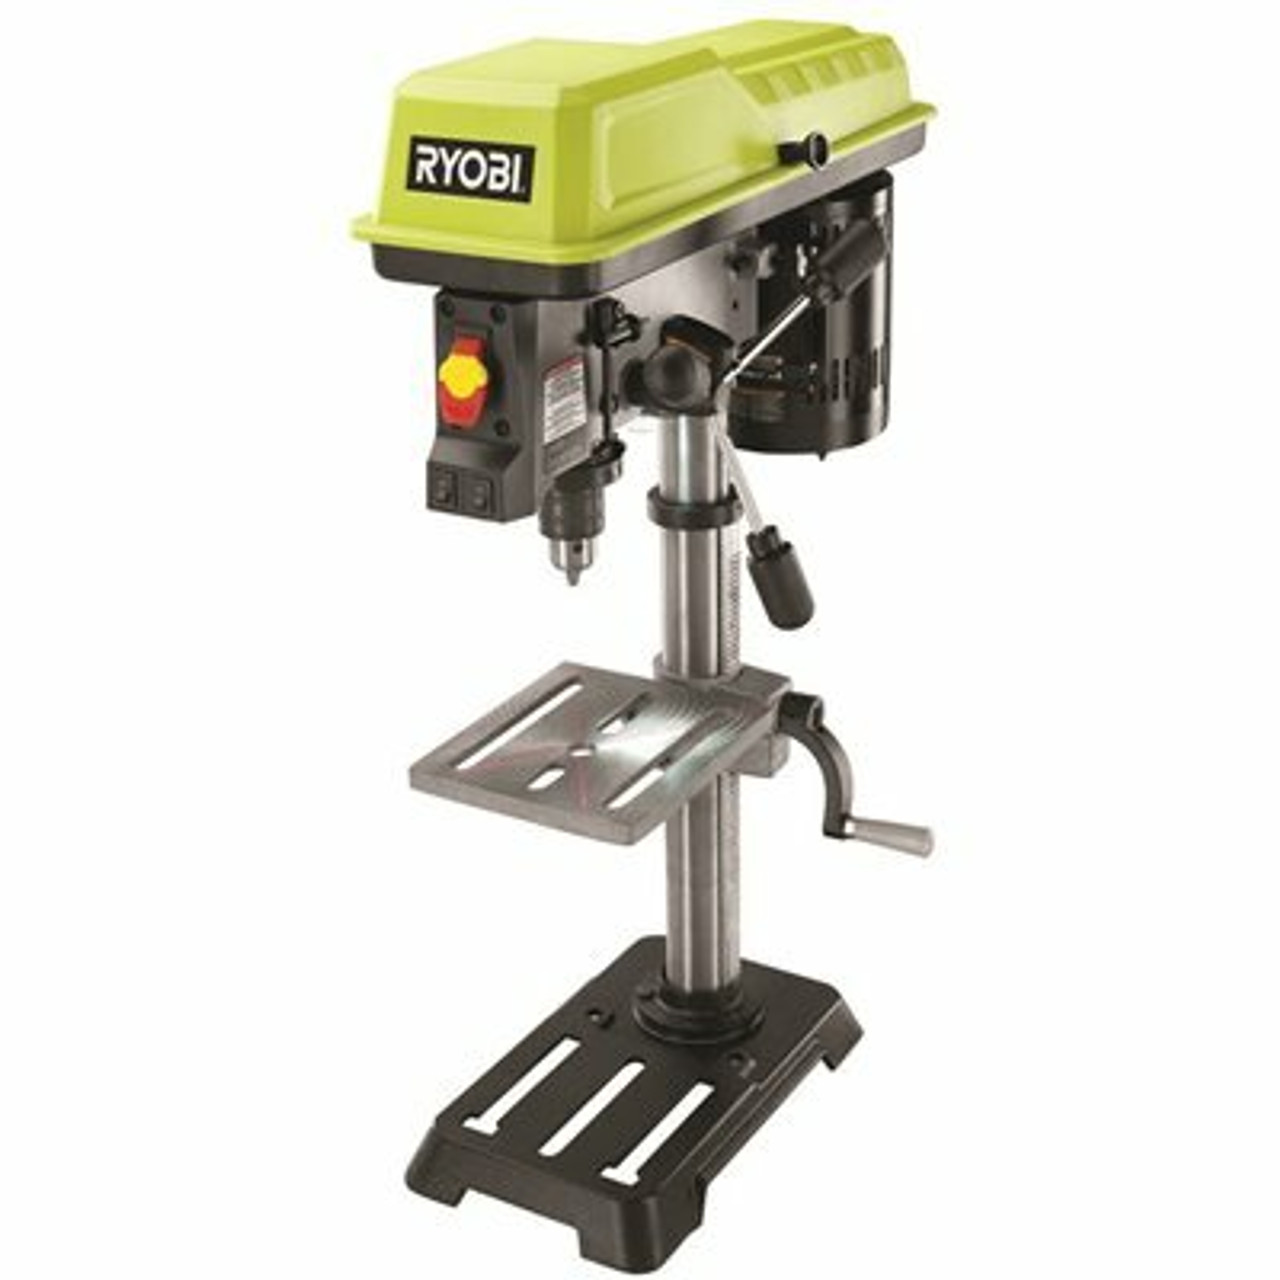 Ryobi 10 In. Drill Press With Exactline Laser Alignment System